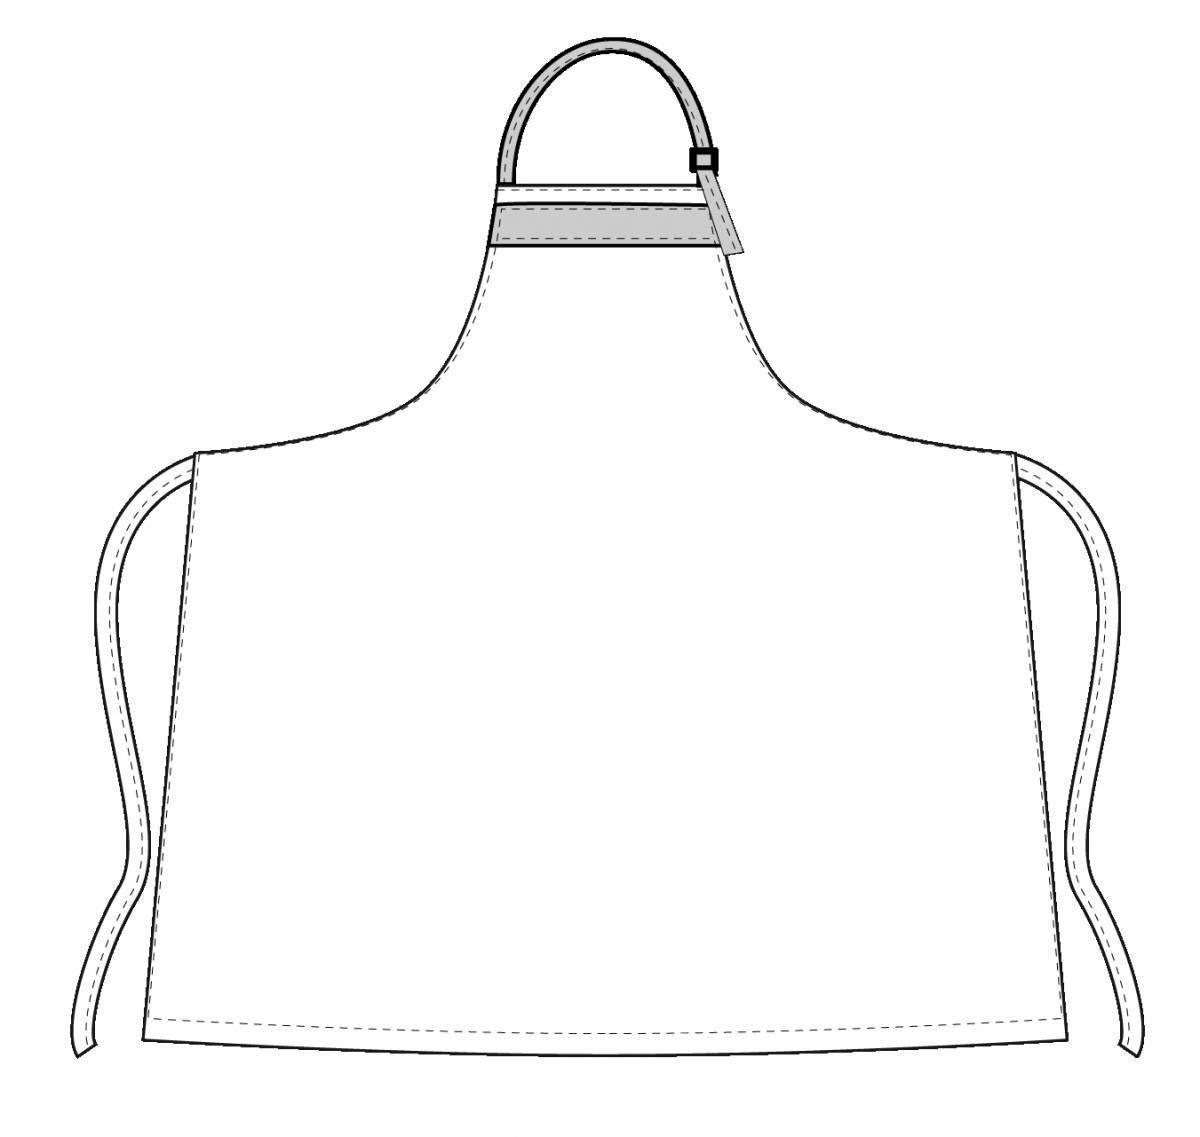 Coloring book apron with colorful pattern for children